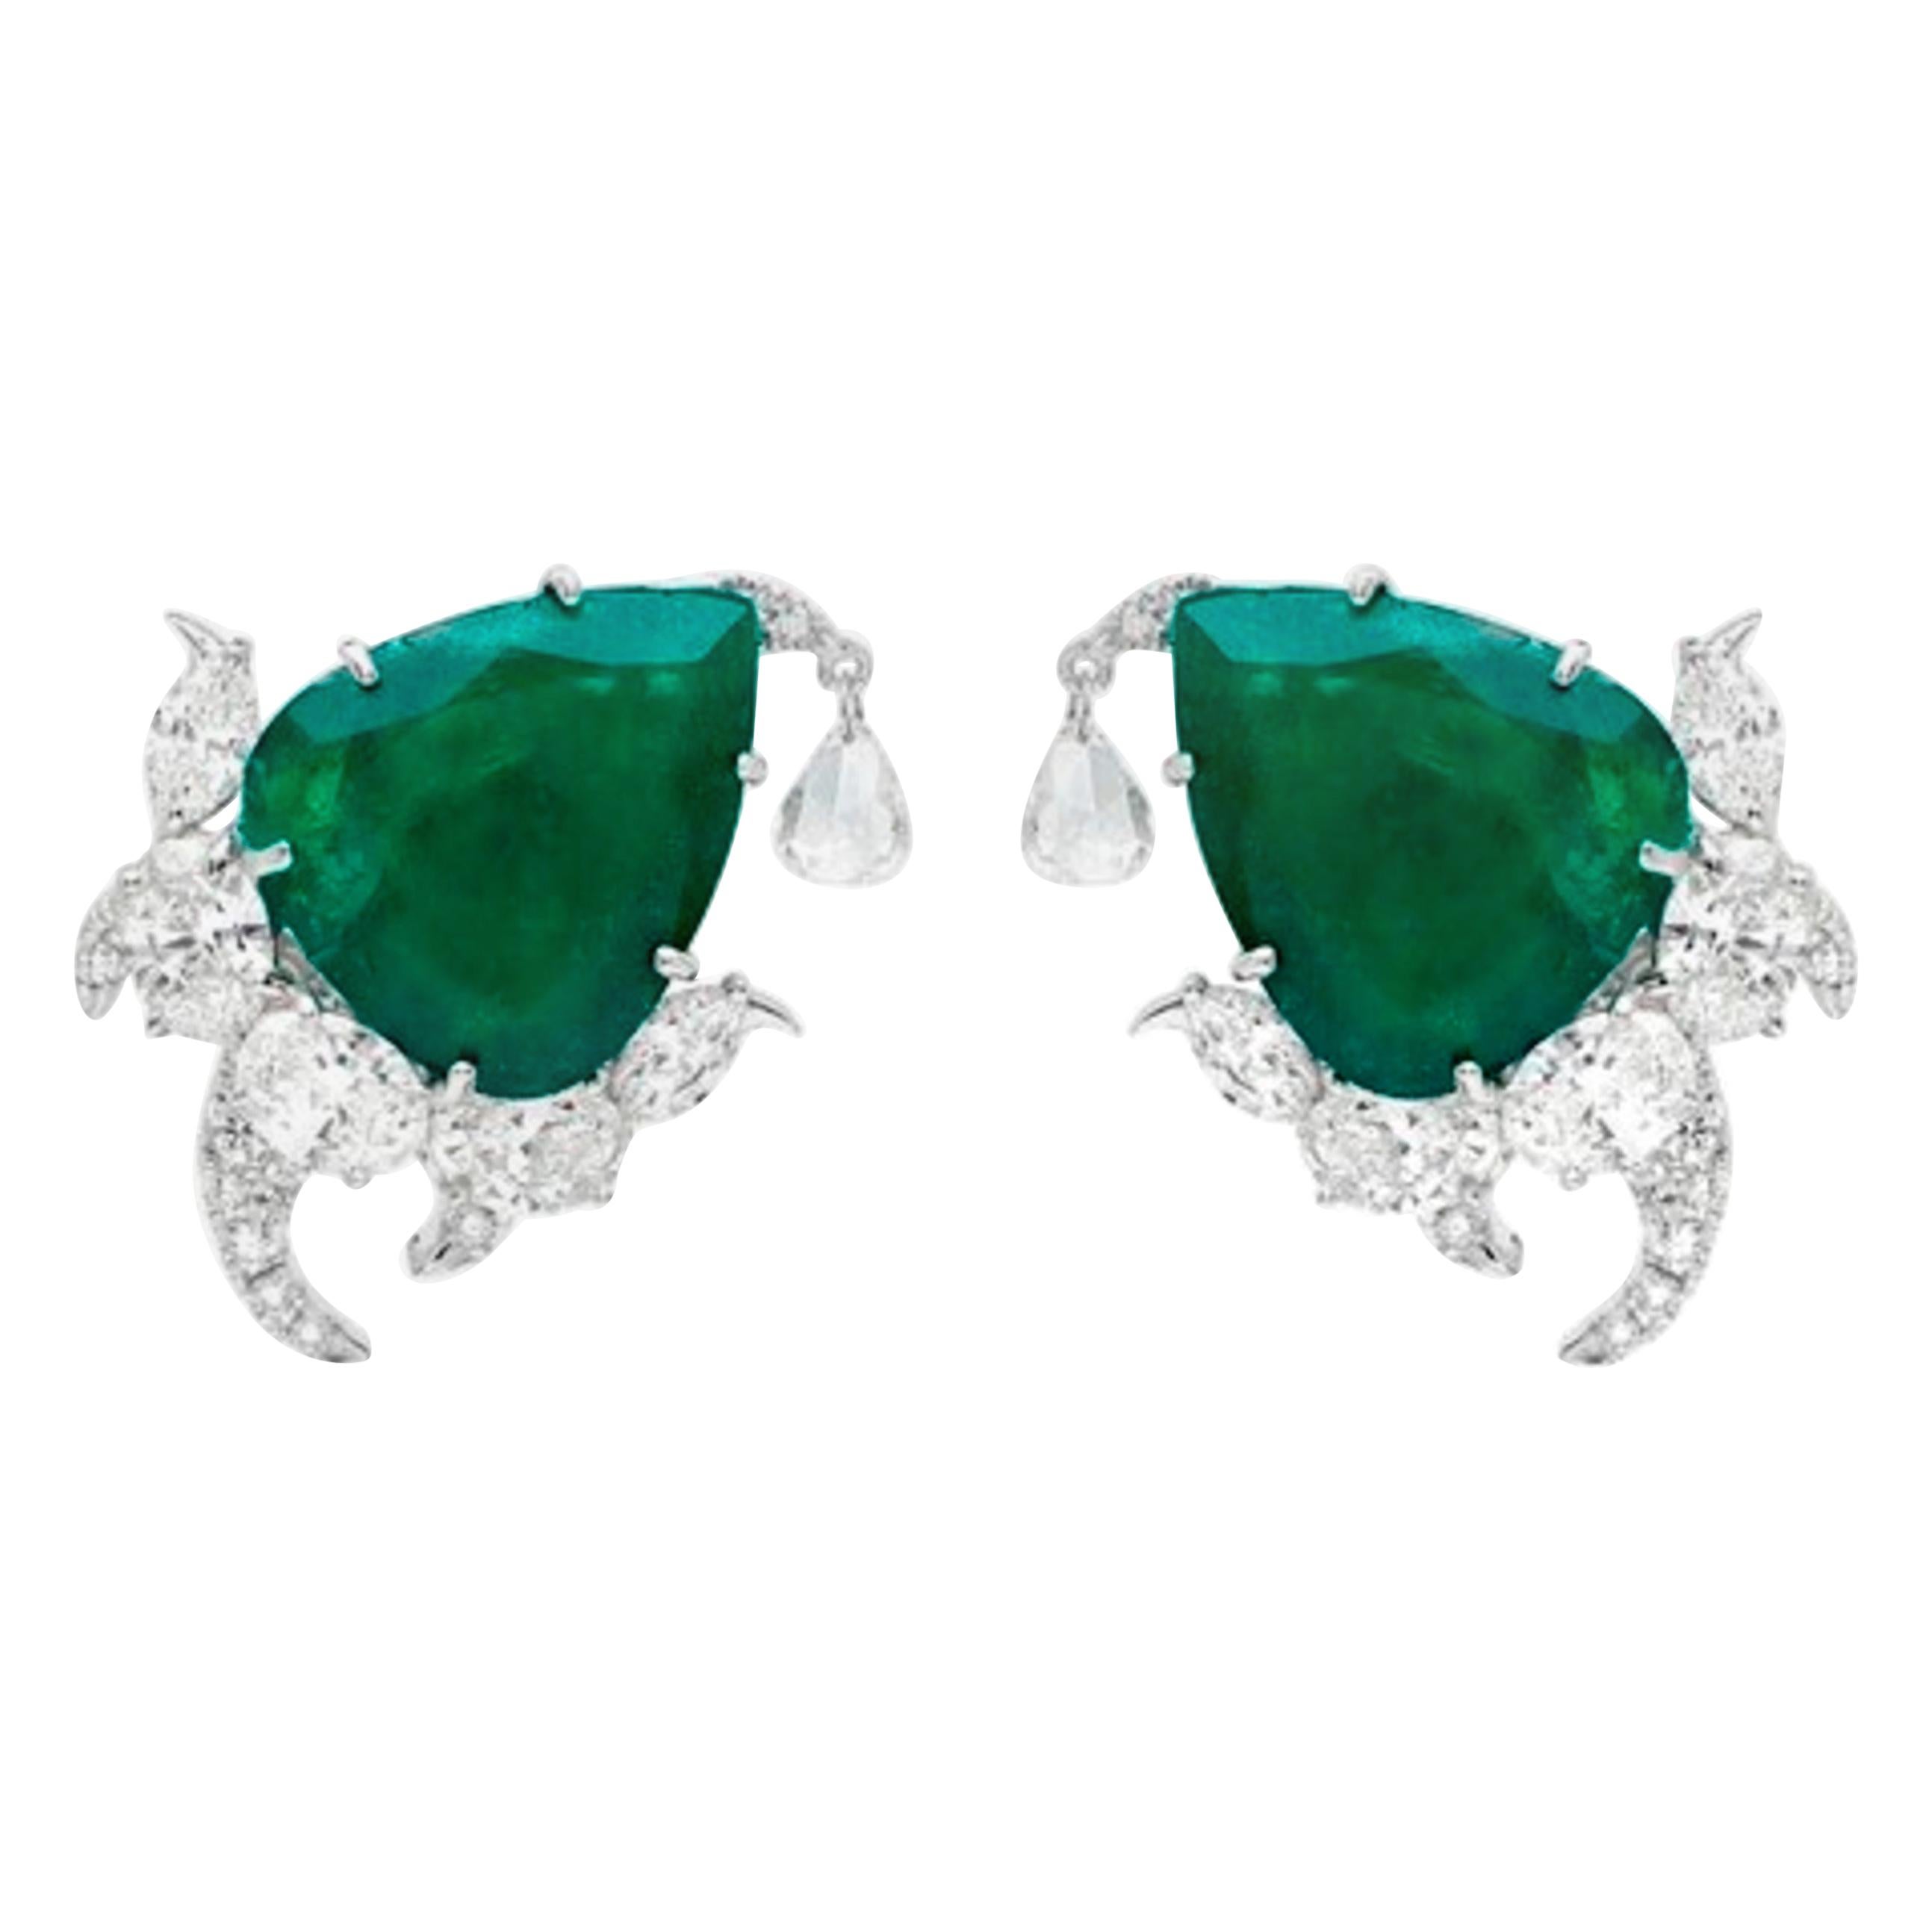 18 Karat White Gold, Brilliant Cut Diamonds and Emerald Studded Earrings For Sale